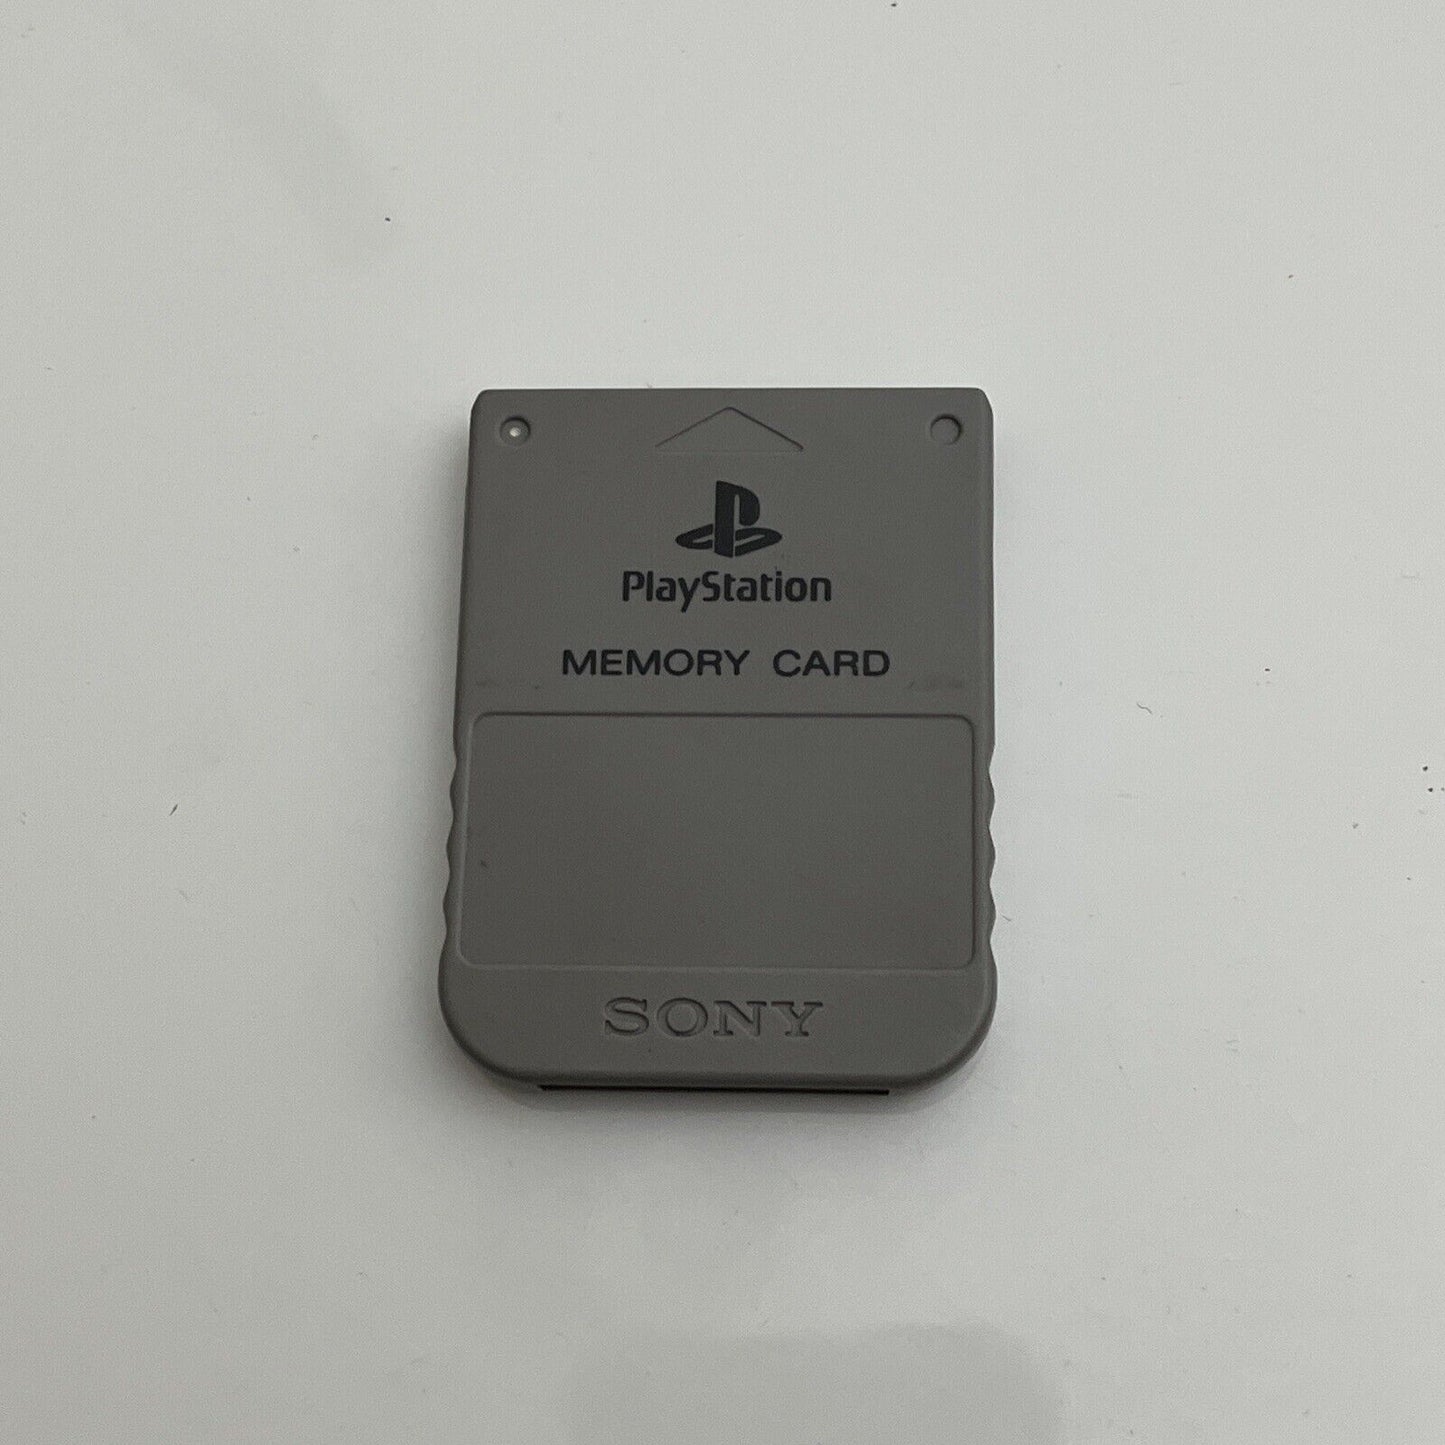 Official Sony PlayStation Memory Card PS1 - SCPH1020 Genuine